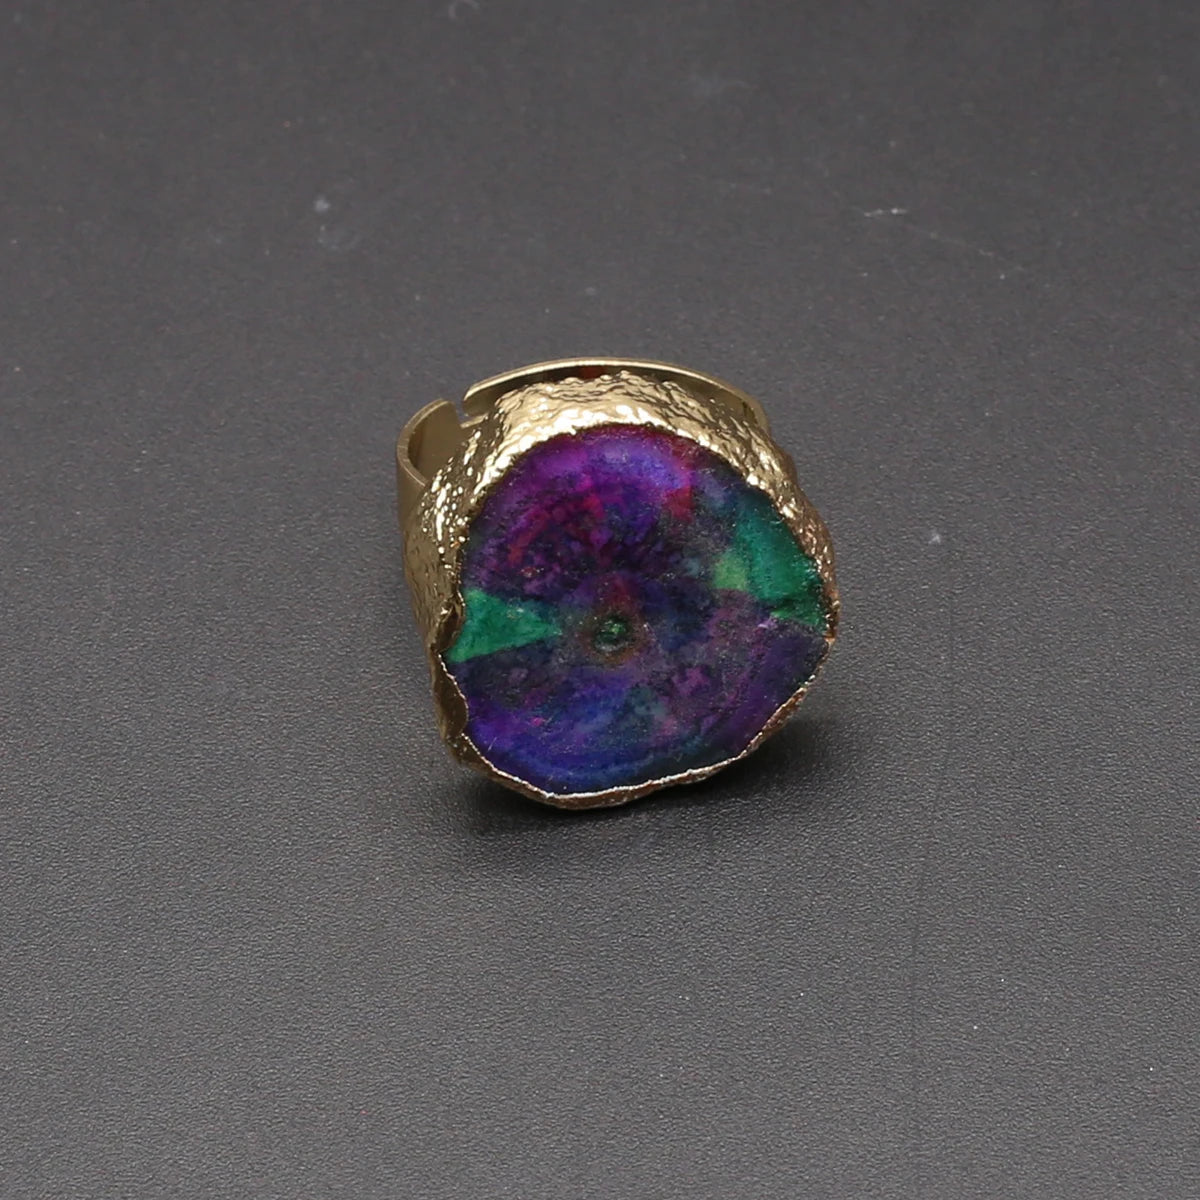 Multi Colored Natural Stones Semi Precious Stones Irregular Water Crystal Buds High-Quality Jewelry Ring Gifts